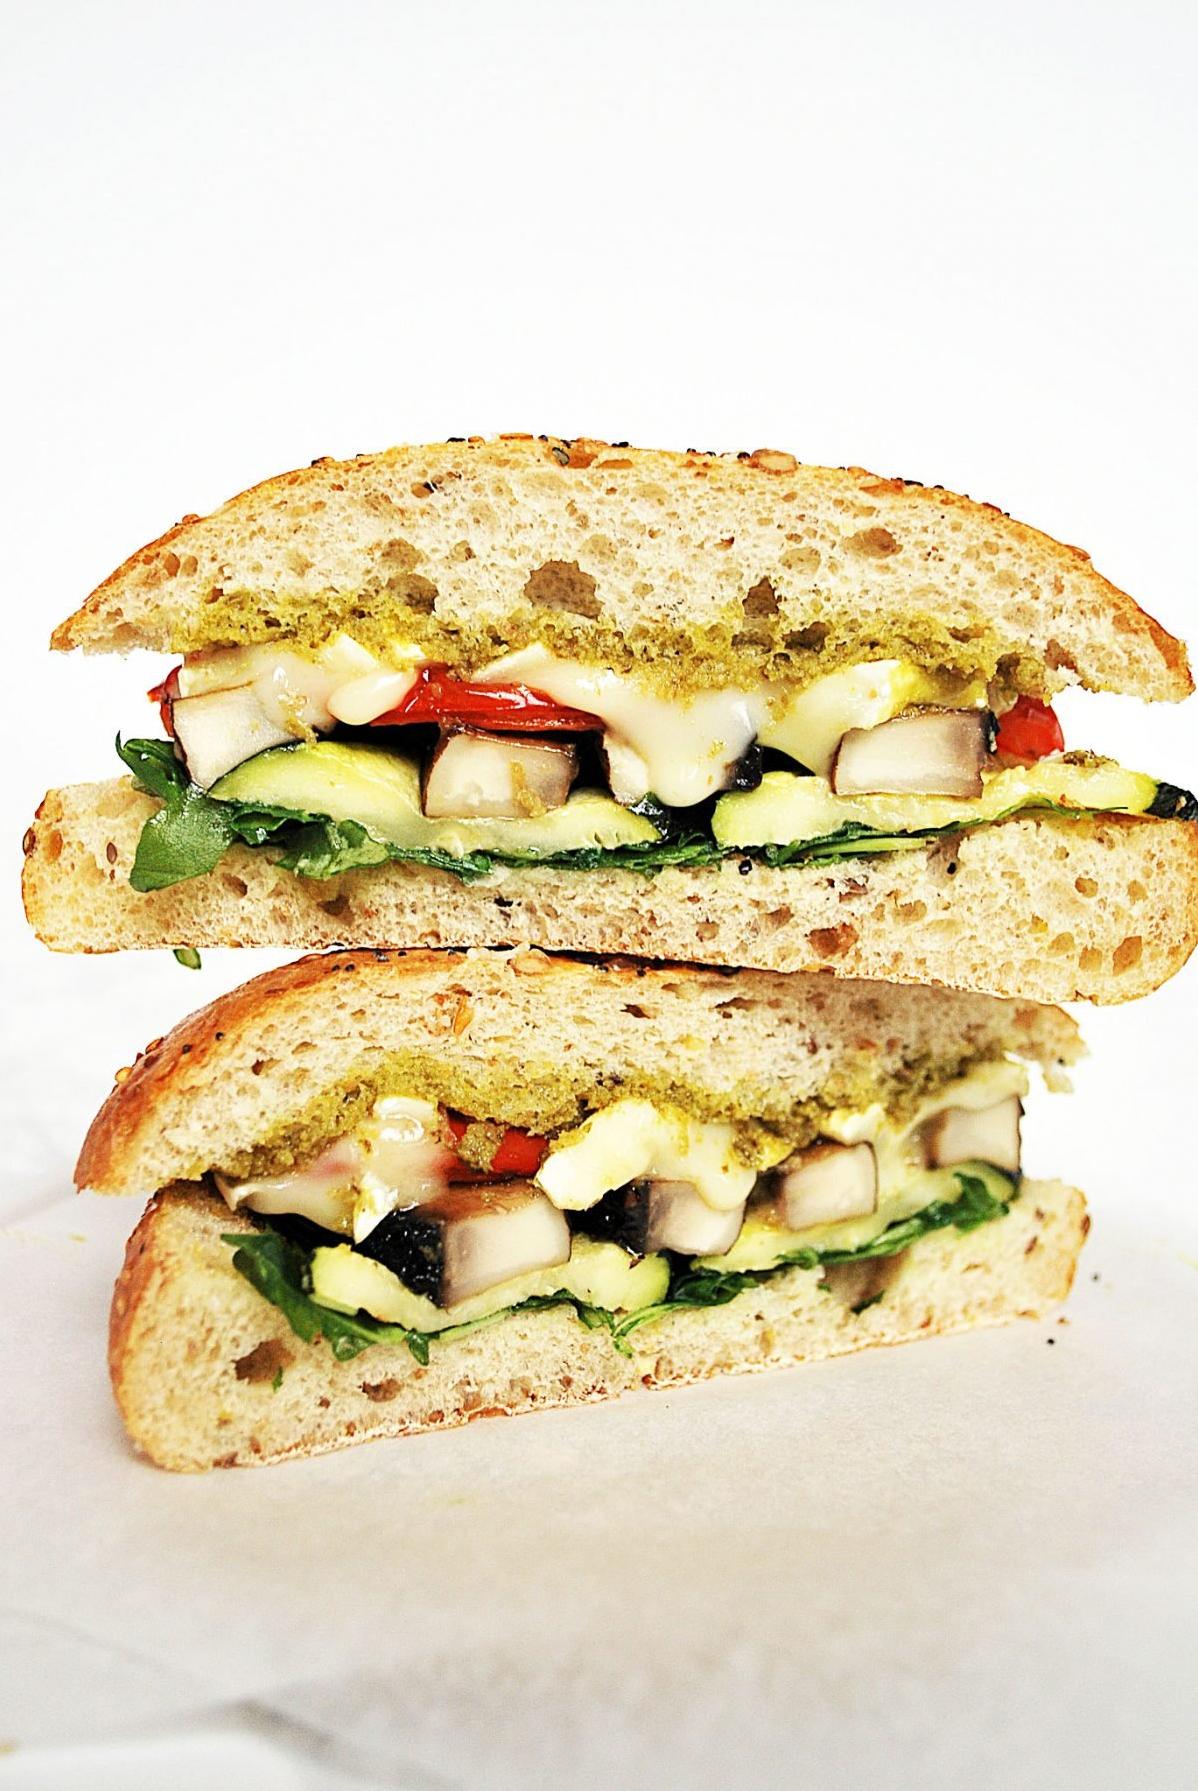  Discover the perfect harmony of flavors and textures in this elegant vegetarian sandwich